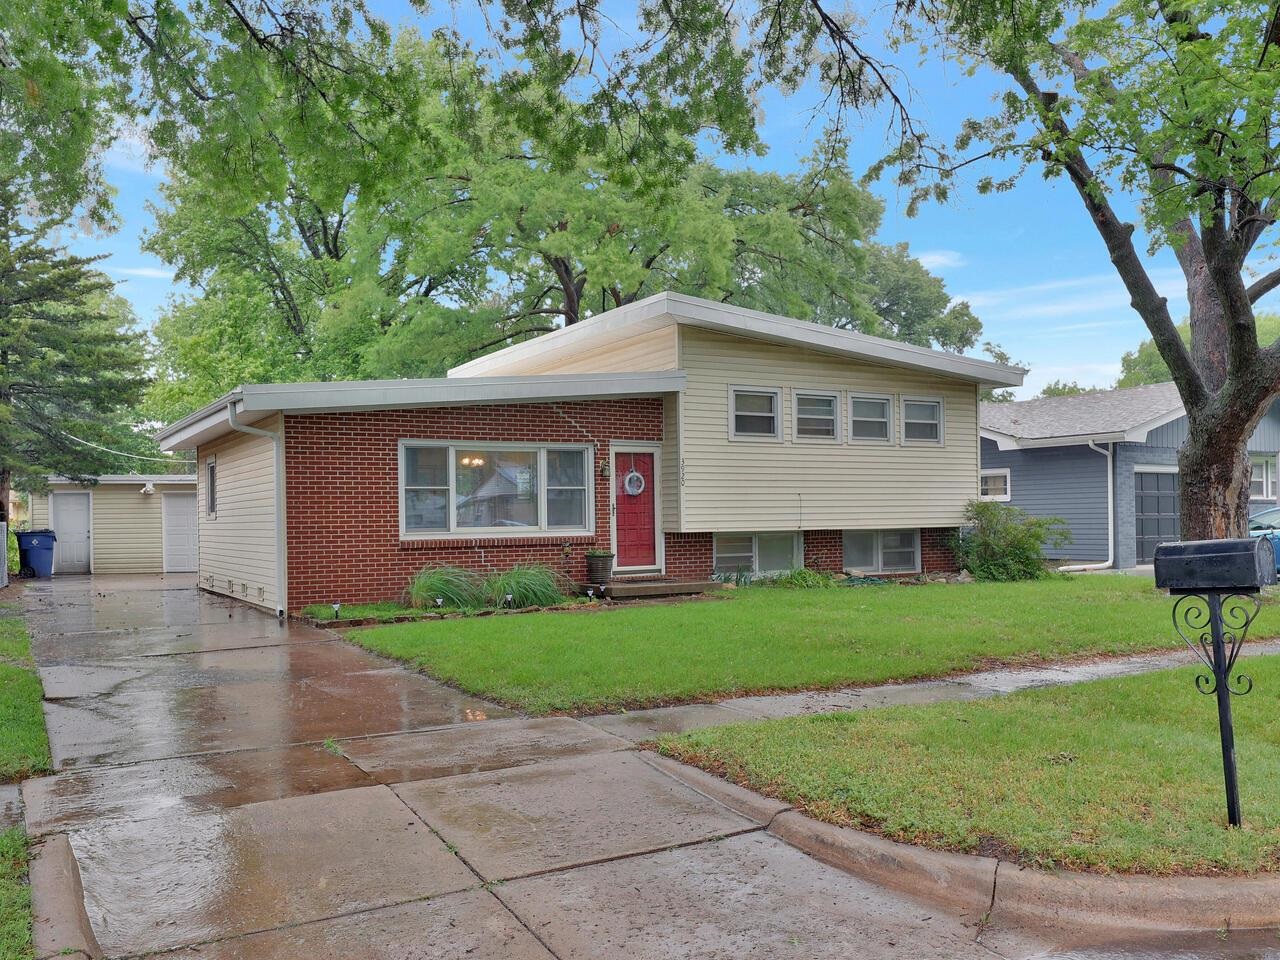 You will want to hurry to see this charming 4 bedroom 2 bath home in one of Wichita's cutest neighbo